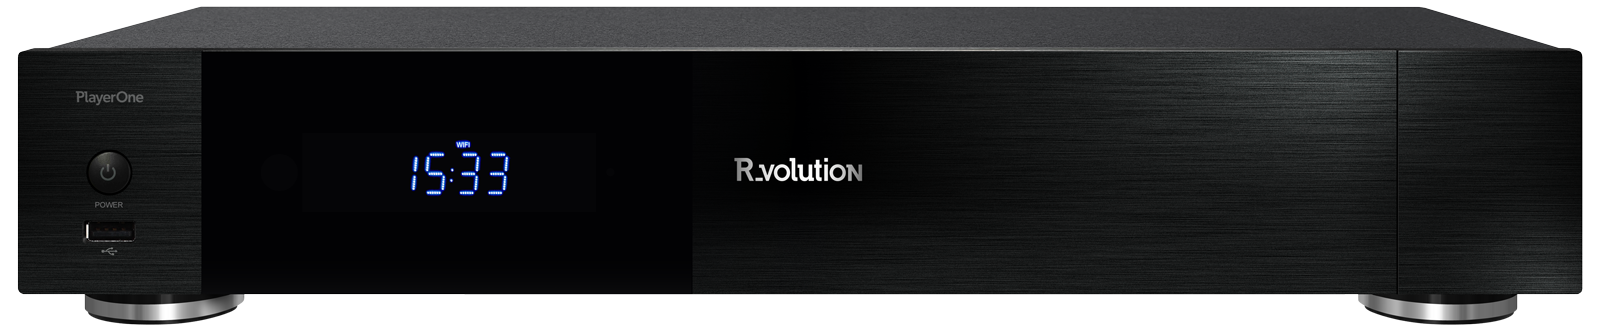 r_volution-playerone-front-top-screen-light-transparent-1600x331.png